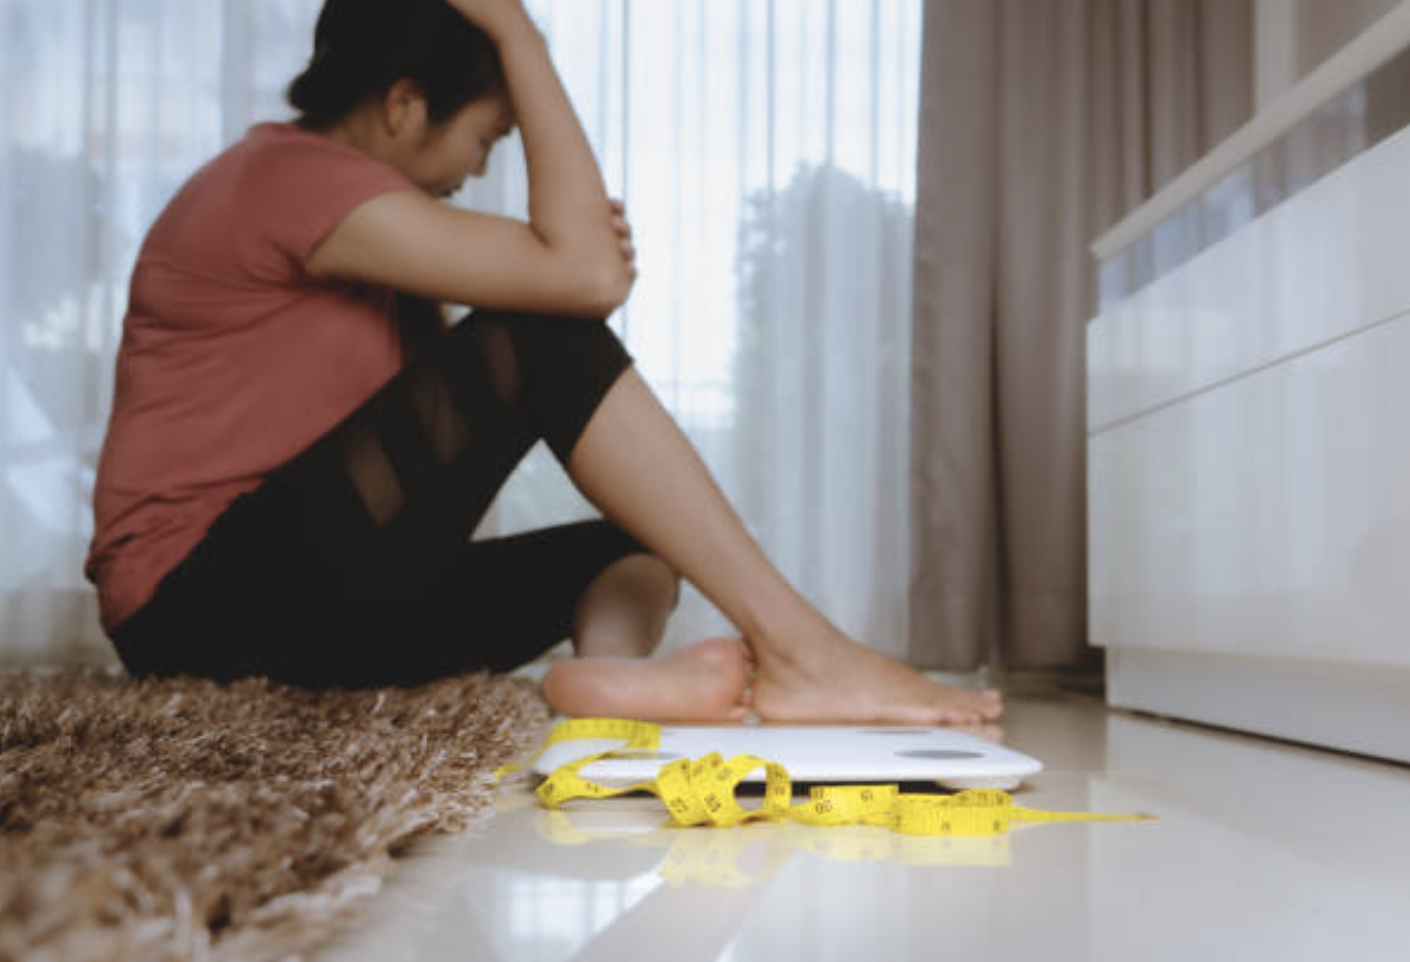 A frustrated woman next to a scale